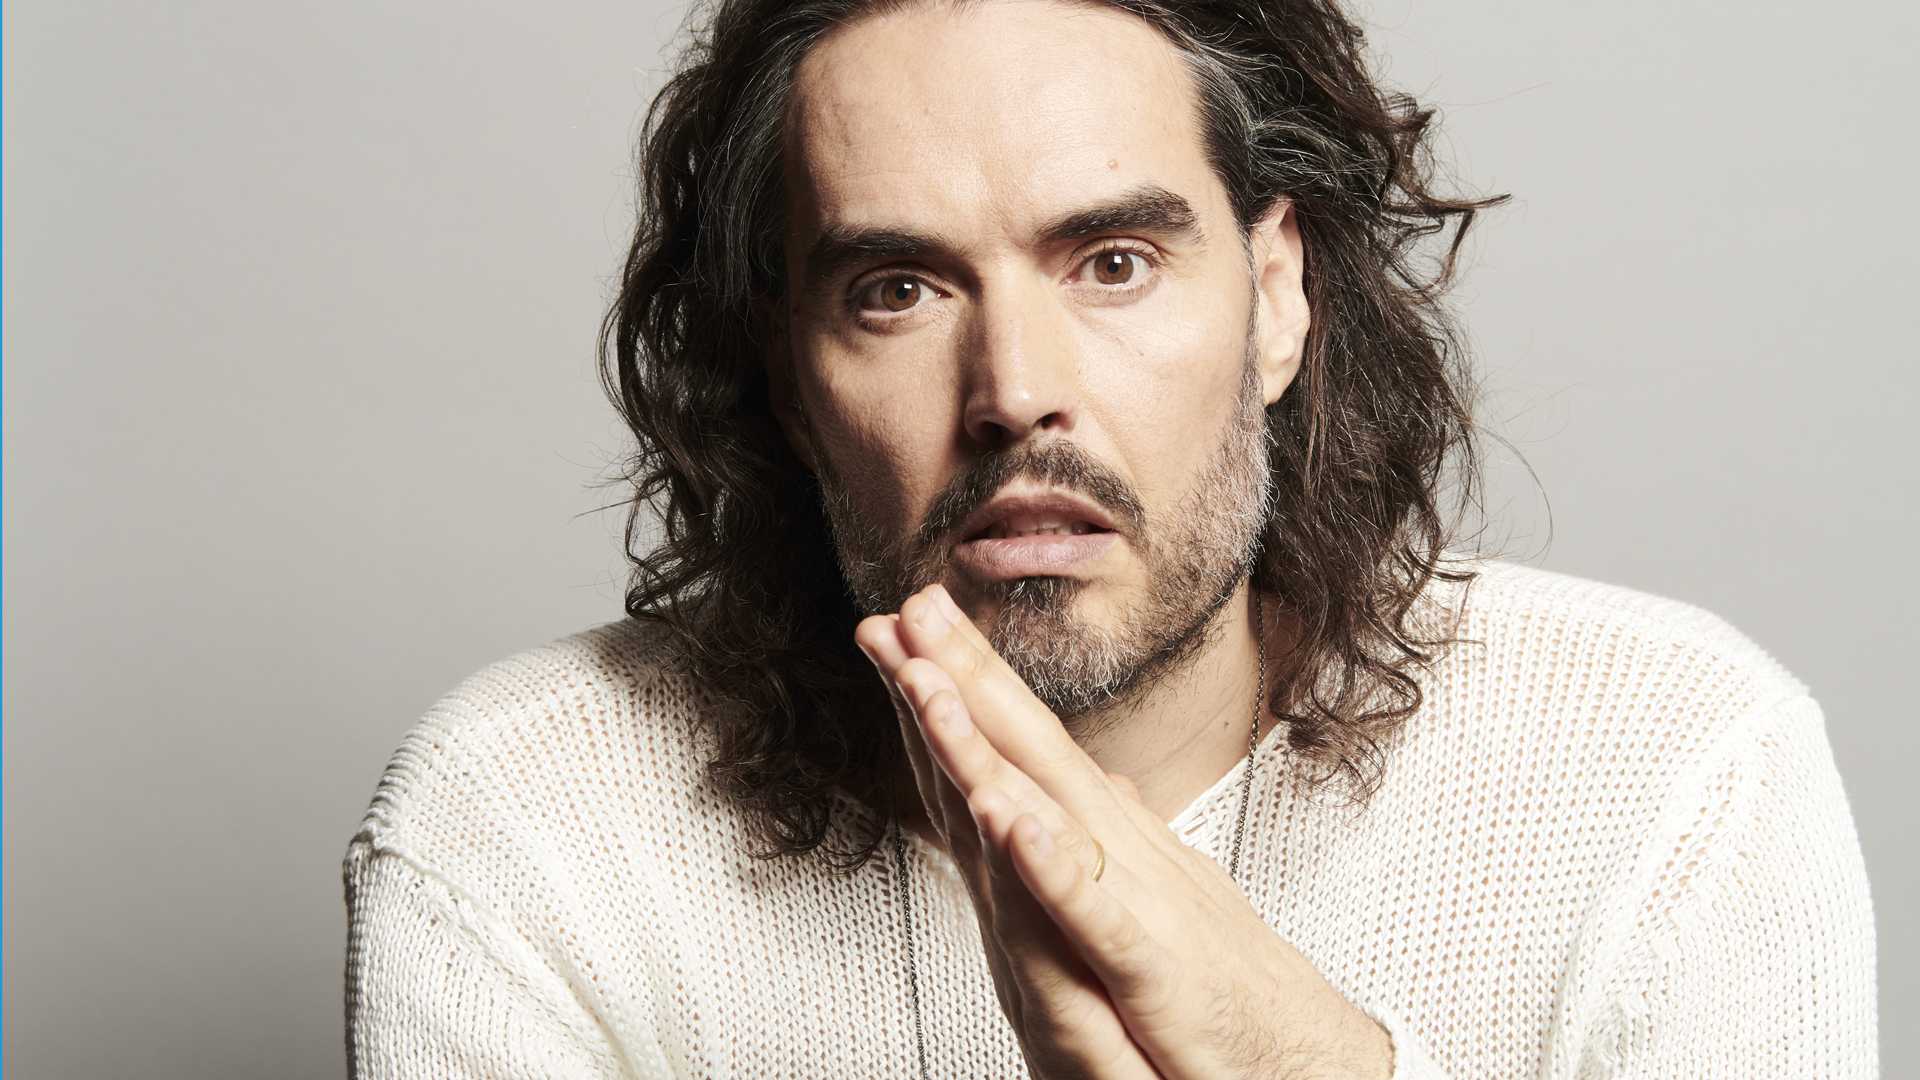 Russell Brand (Source: The Big Issue)